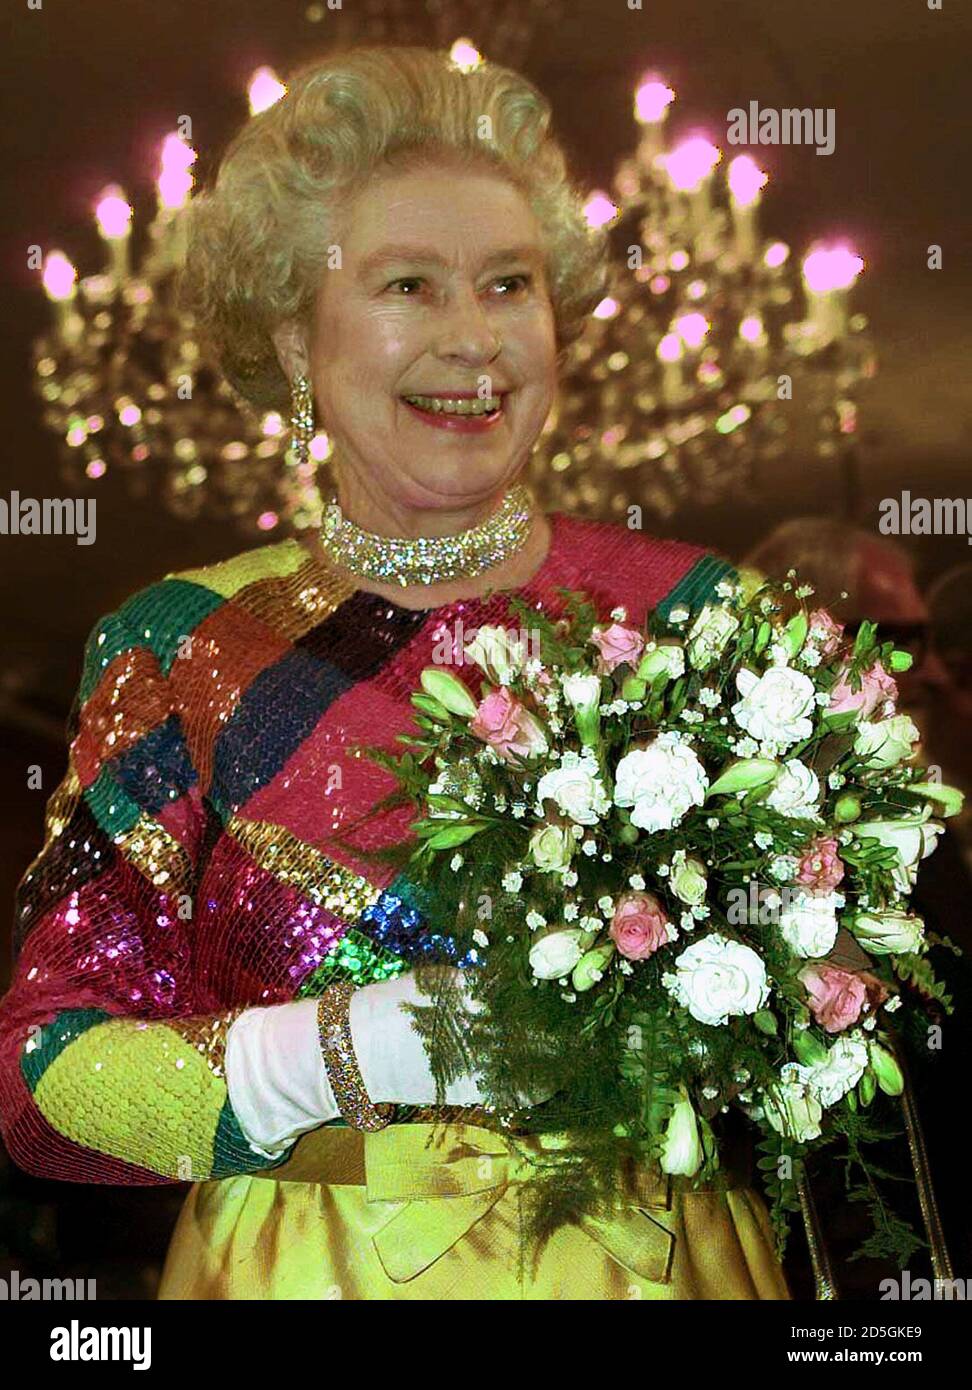 Britain's Queen Elizabeth wearing a brightly coloured harlequin dress arrives at Birmingham Hippodrome for the 1999 Royal Variety Performance November 29. the Queen was entertained during the Charity performance by singing star Charlotte Church and top boy band Westlife.  PS/ME Stock Photo